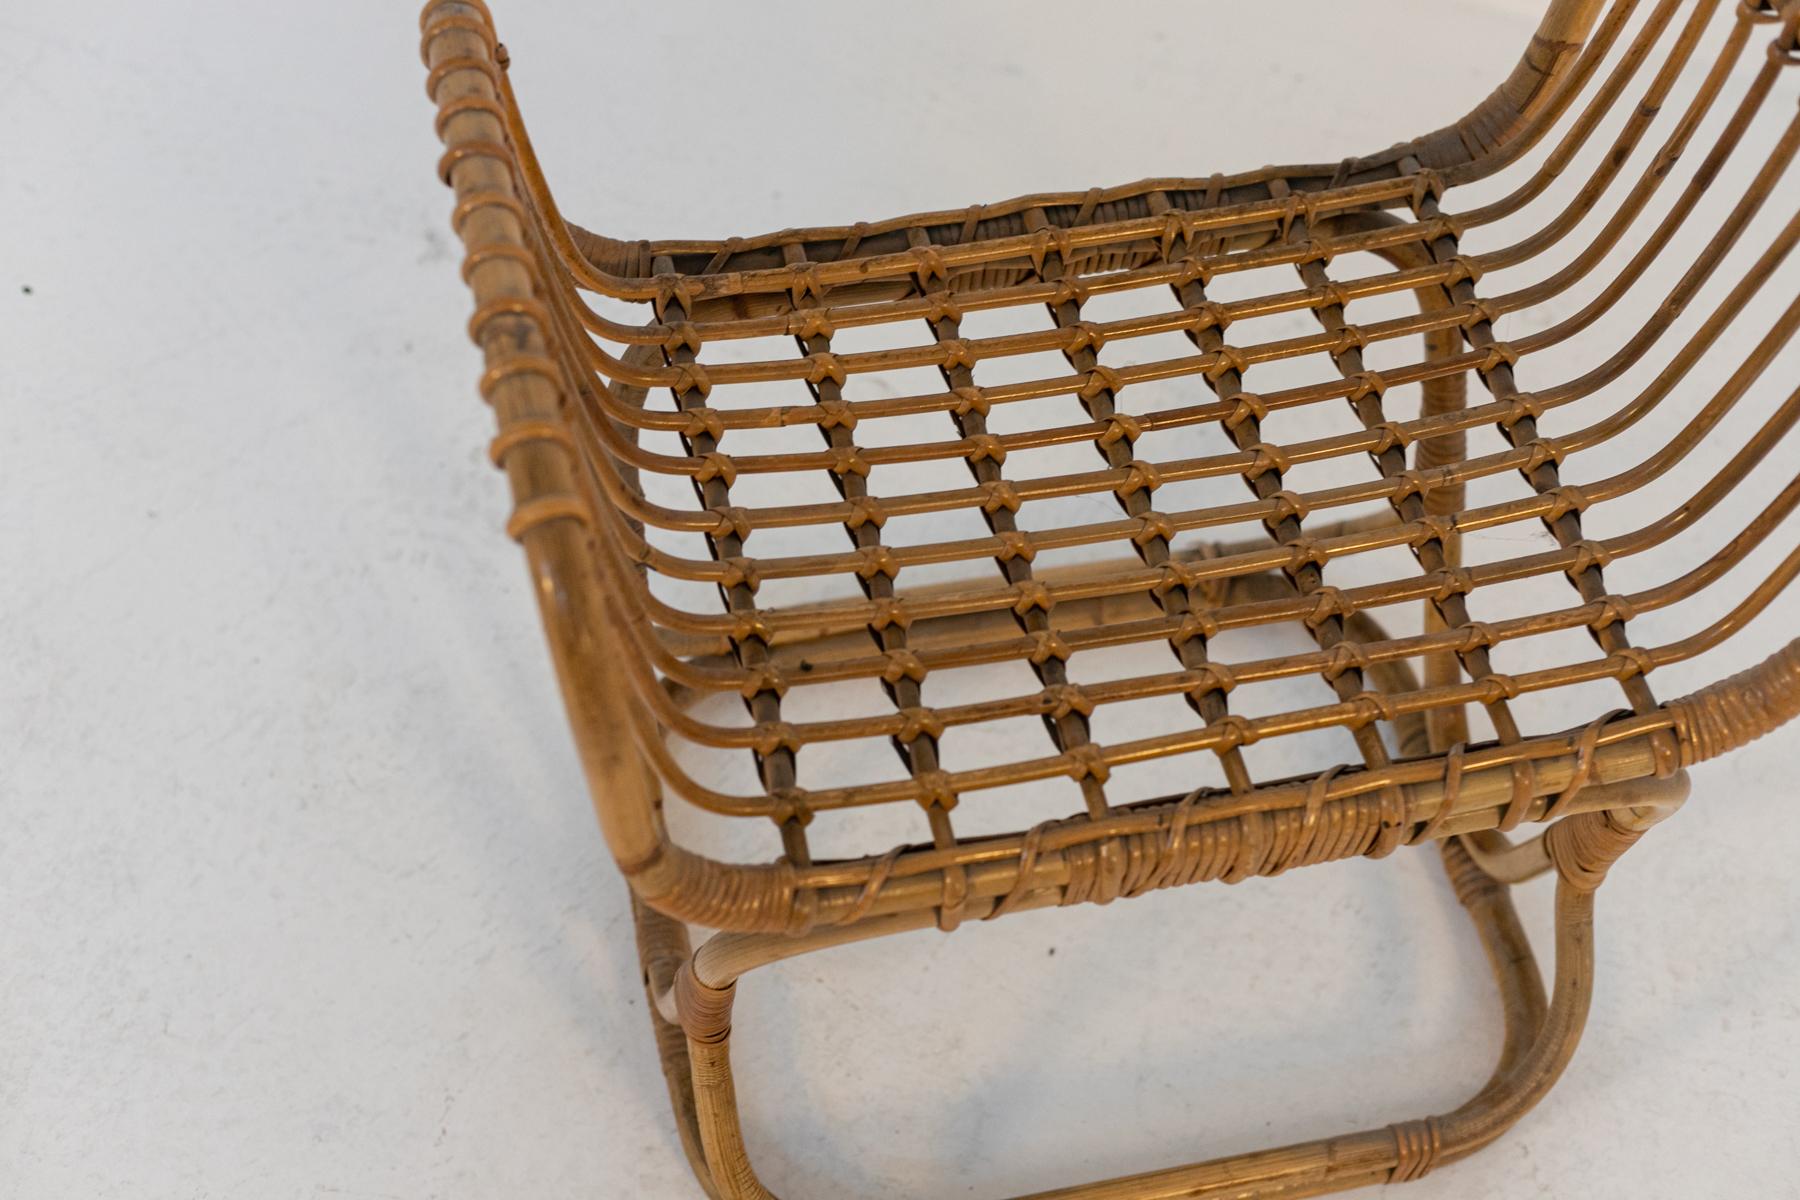 Particular vintage Italian bamboo and rattan footstool designed in the 50s. 
The footstool has a sinuous and soft shape, the structure is completely made of durable bamboo, the legs cross to create soft and decorative lines. 
The seat is made